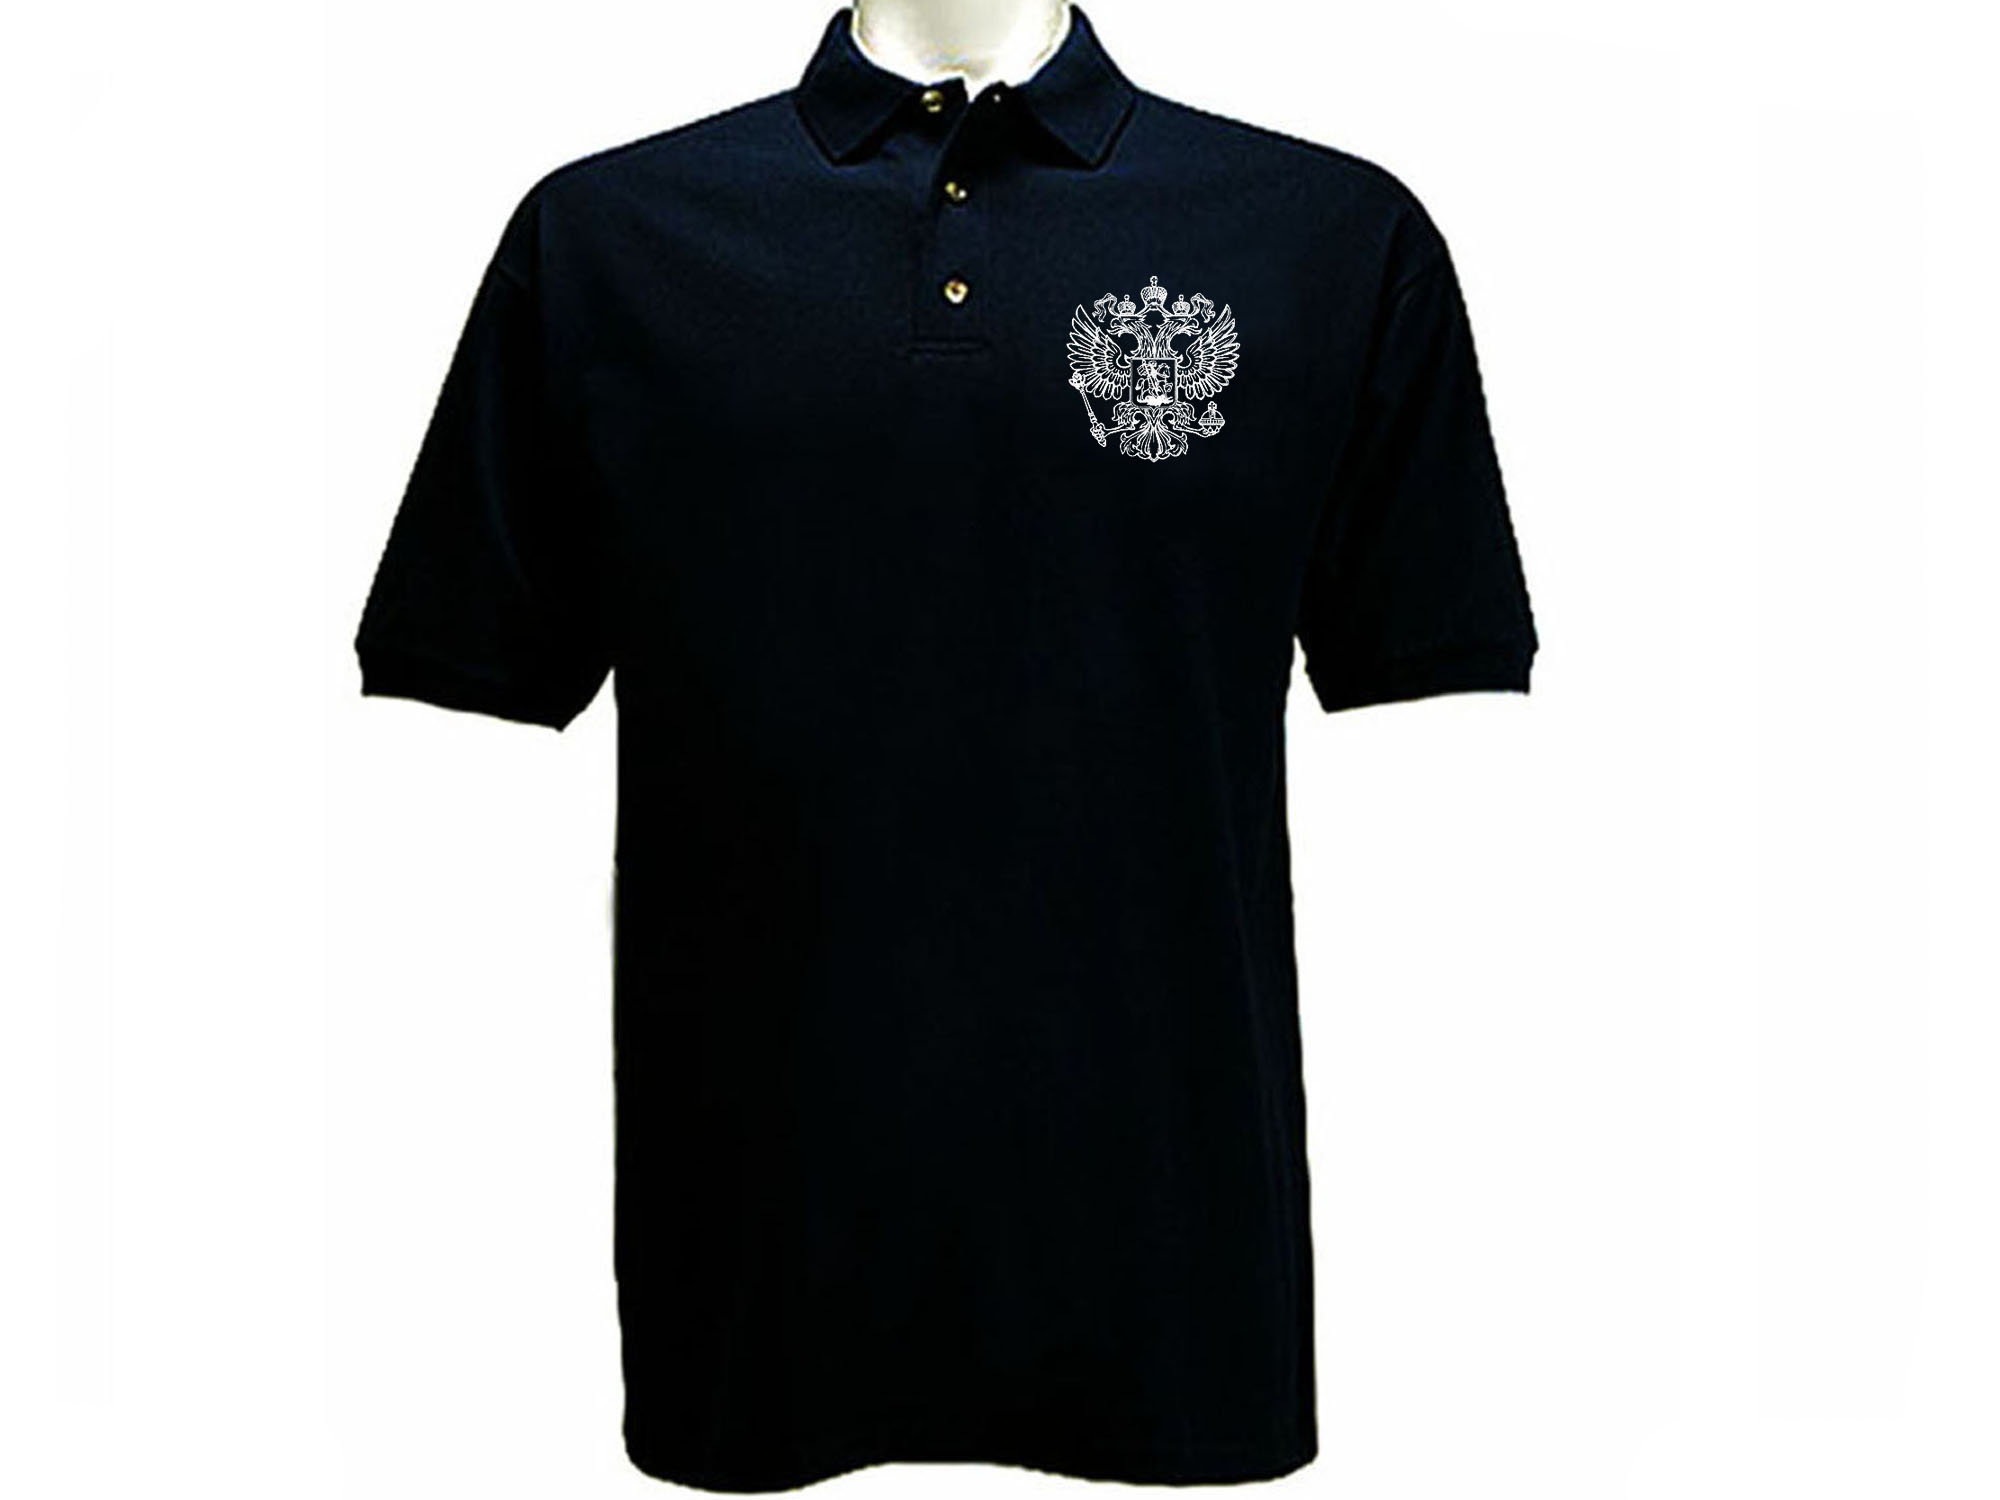 Russian coat of arms two headed eagle polo style t-shirt